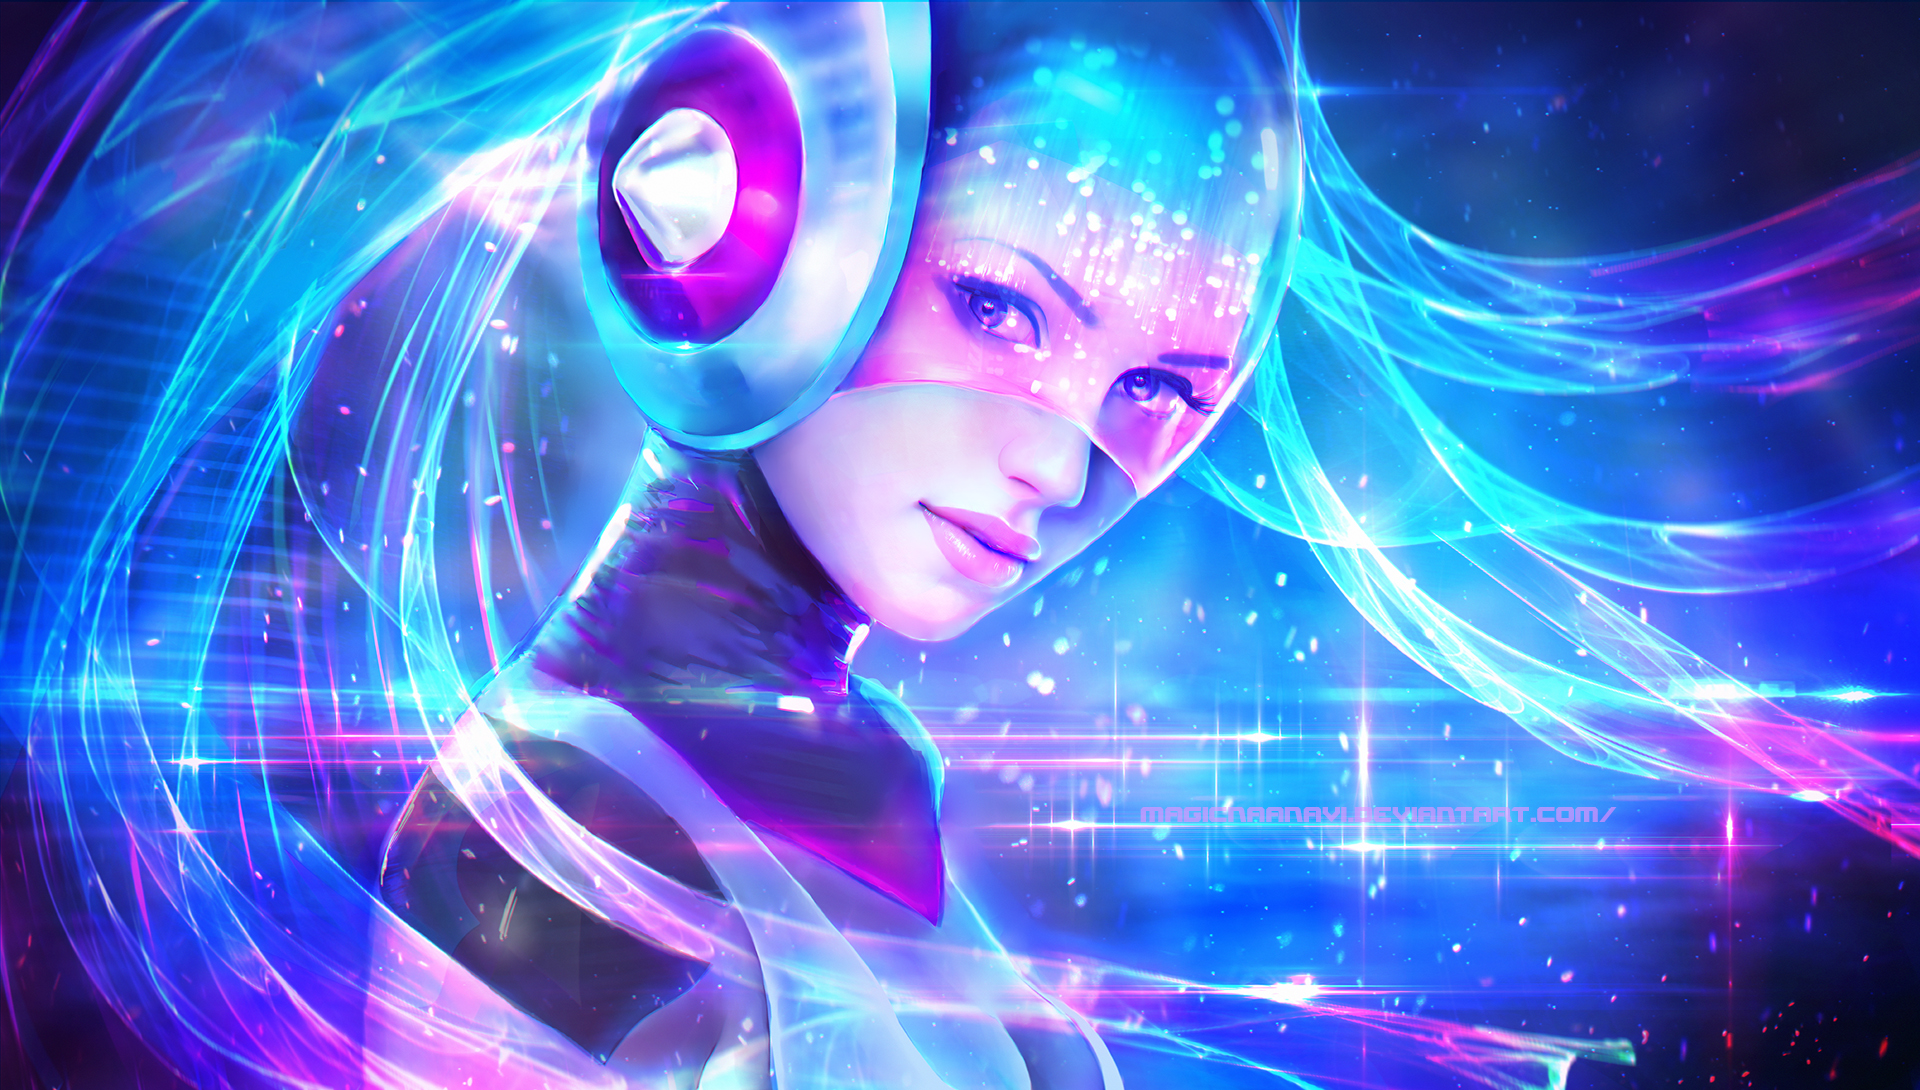 Dj Sona Ethereal Lolwallpapers